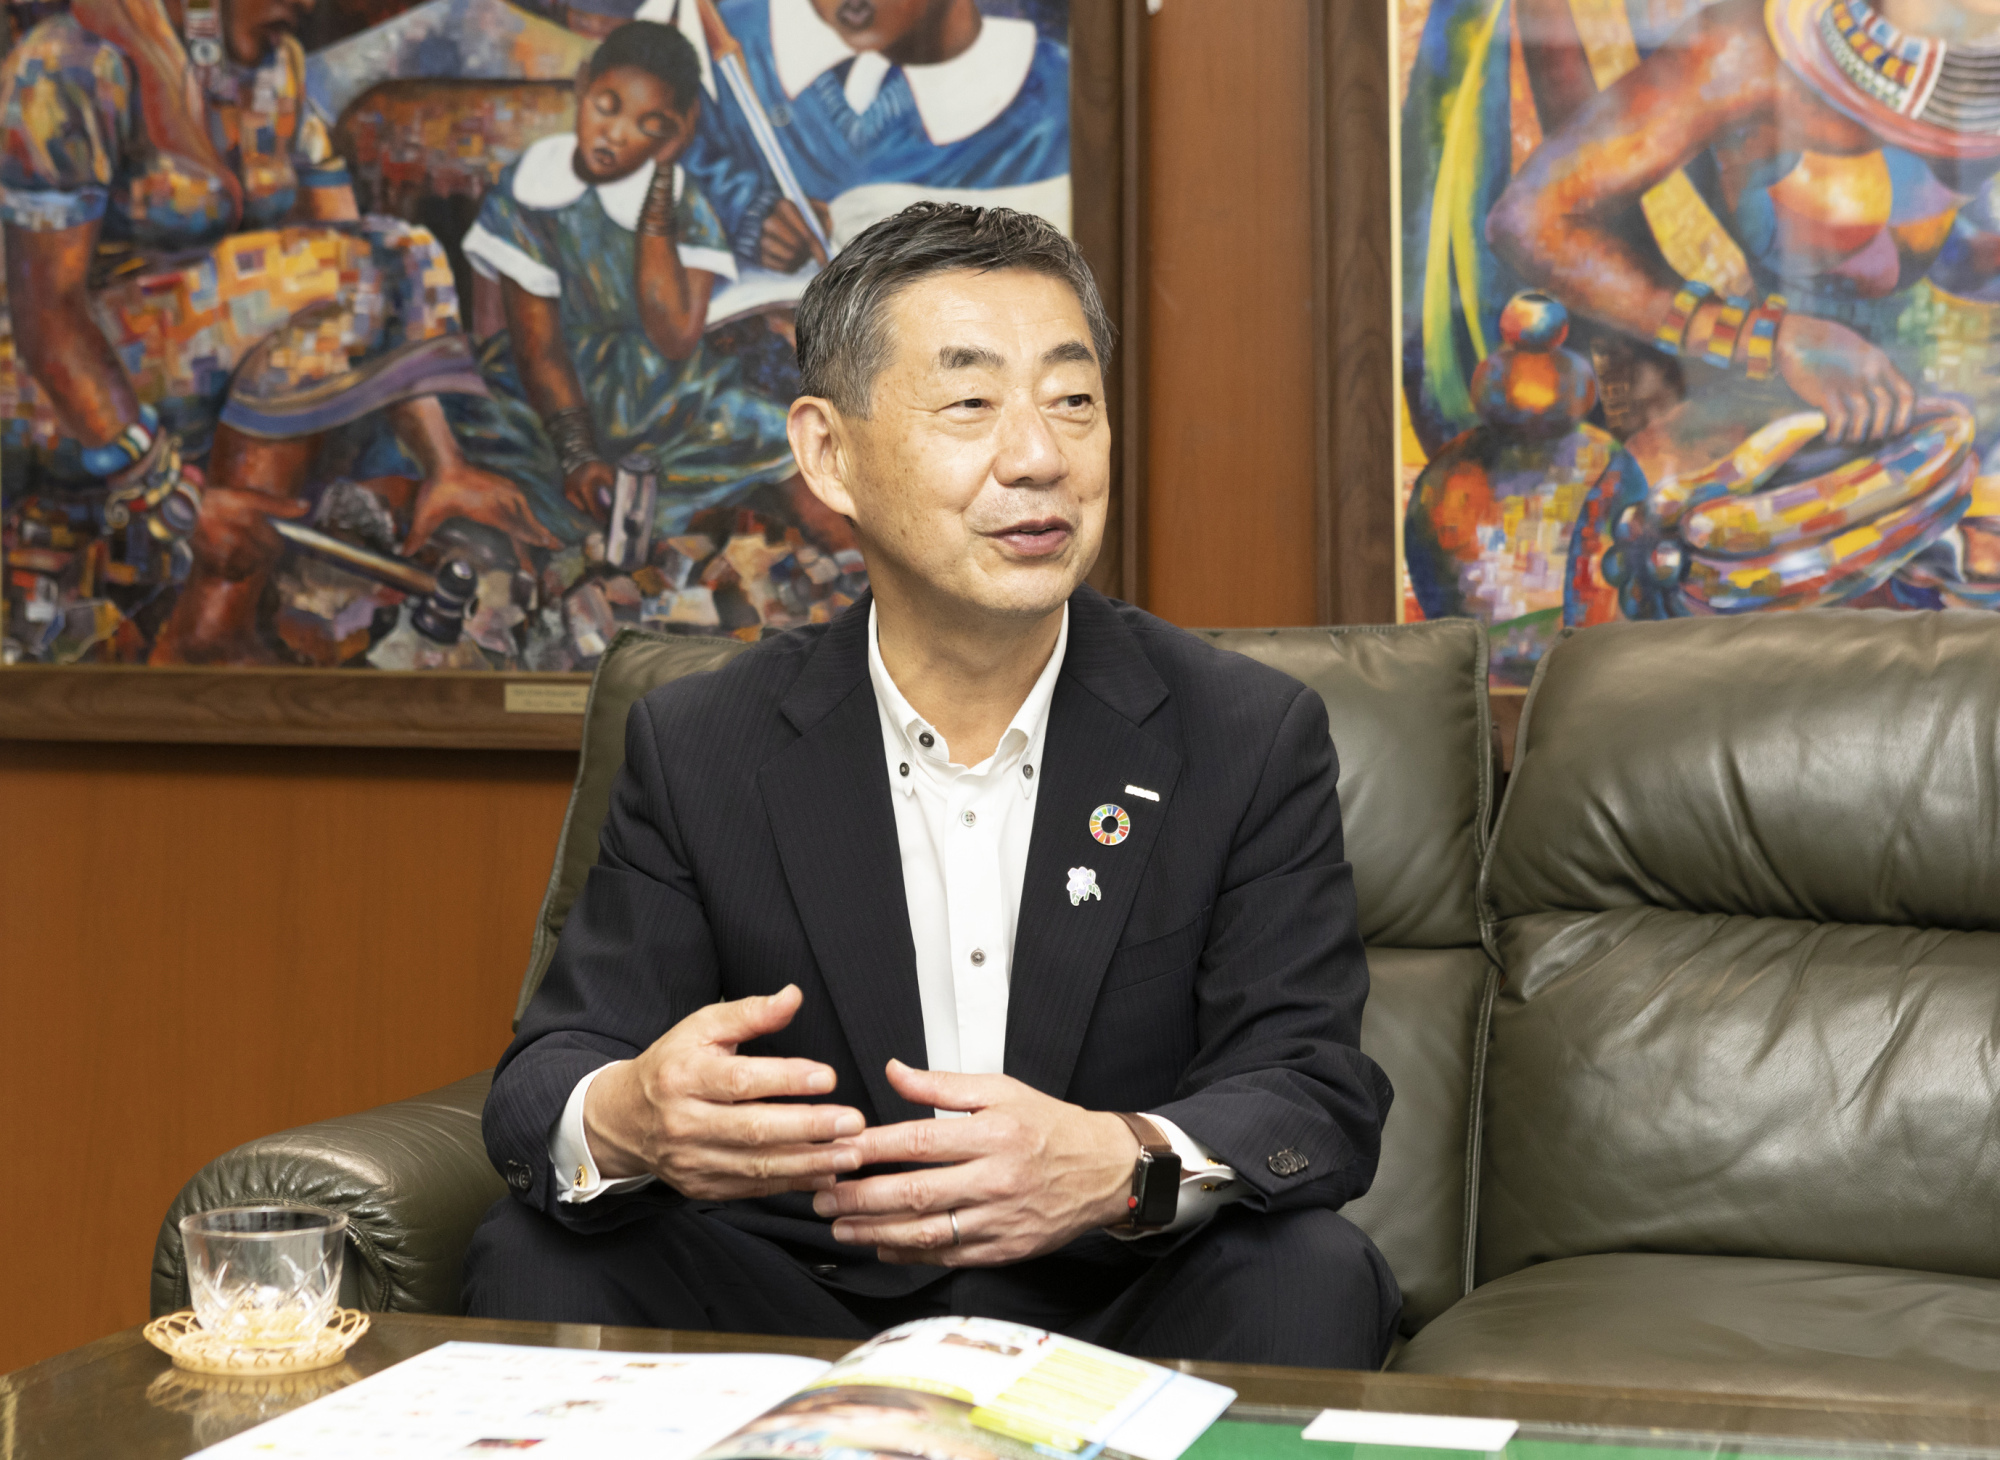 President of Saraya Co. Yusuke Saraya talks during an interview with The Japan Times. He notes that the company makes proactive efforts to health, social and environmental issues. | SARAYA CO.